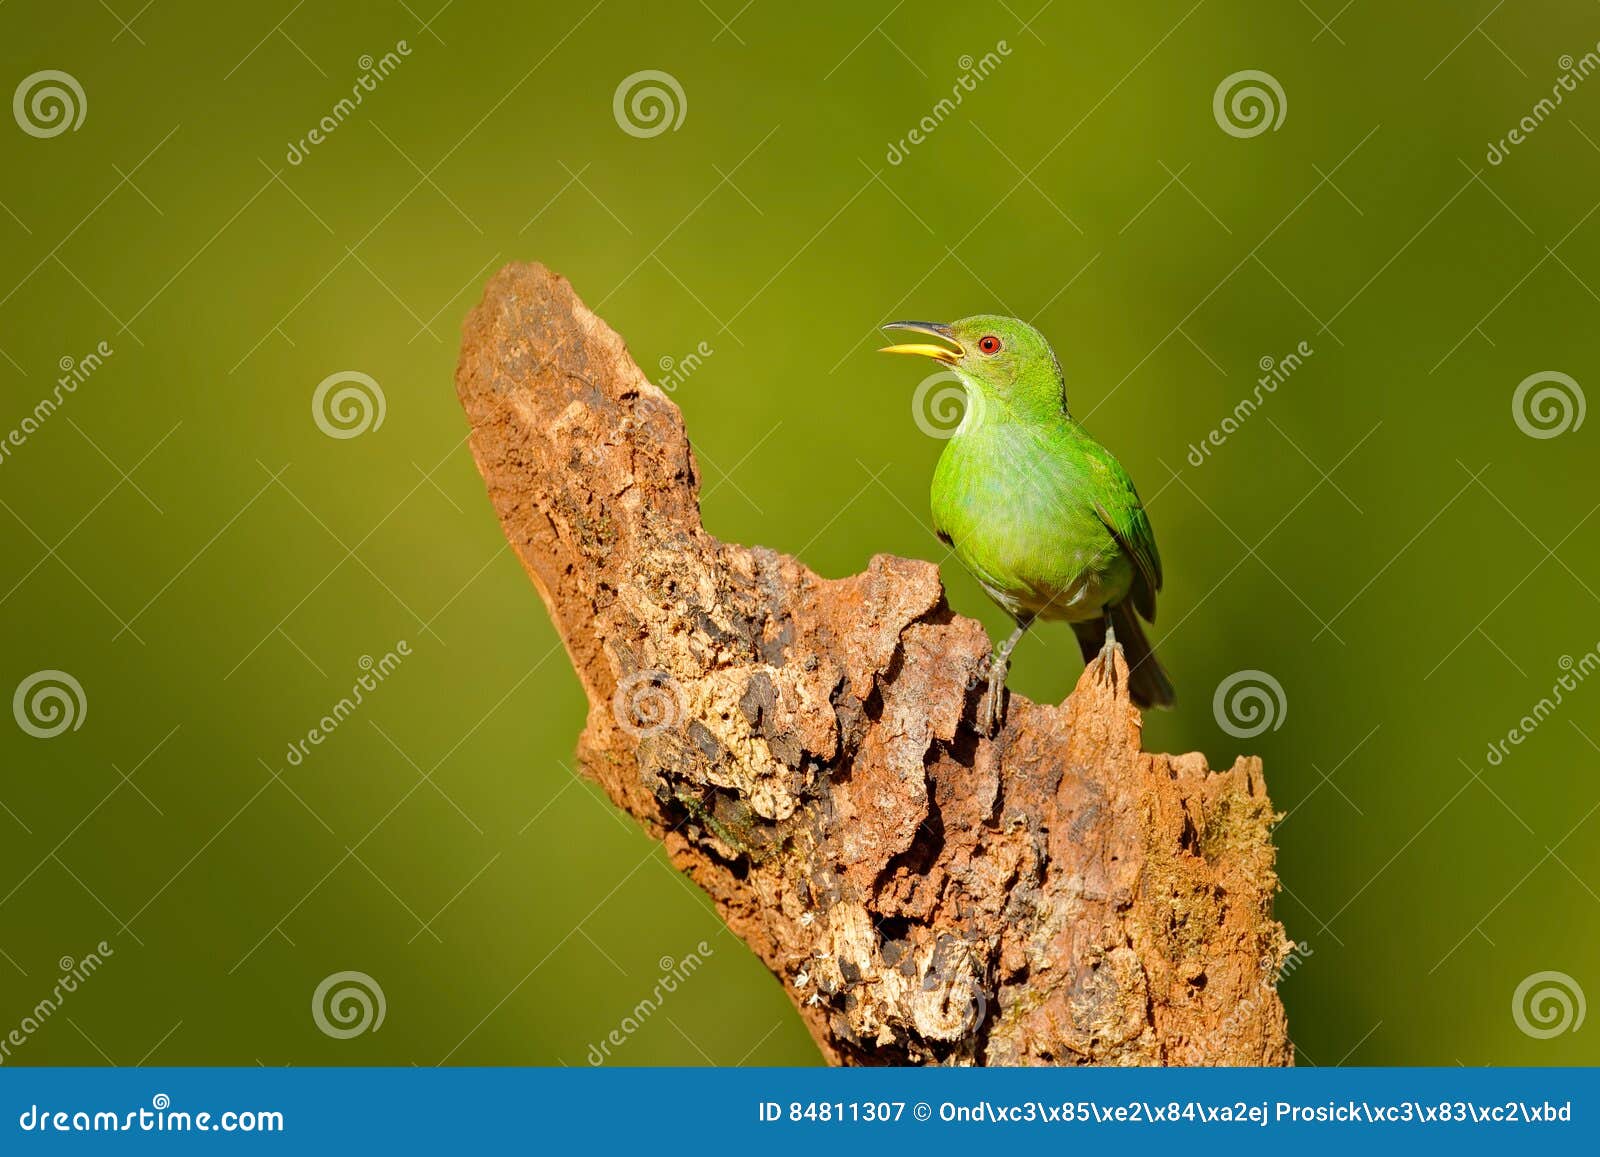 female of green honeycreeper, chlorophanes spiza, exotic tropic malachite green and blue bird form costa rica. tanager from tropic